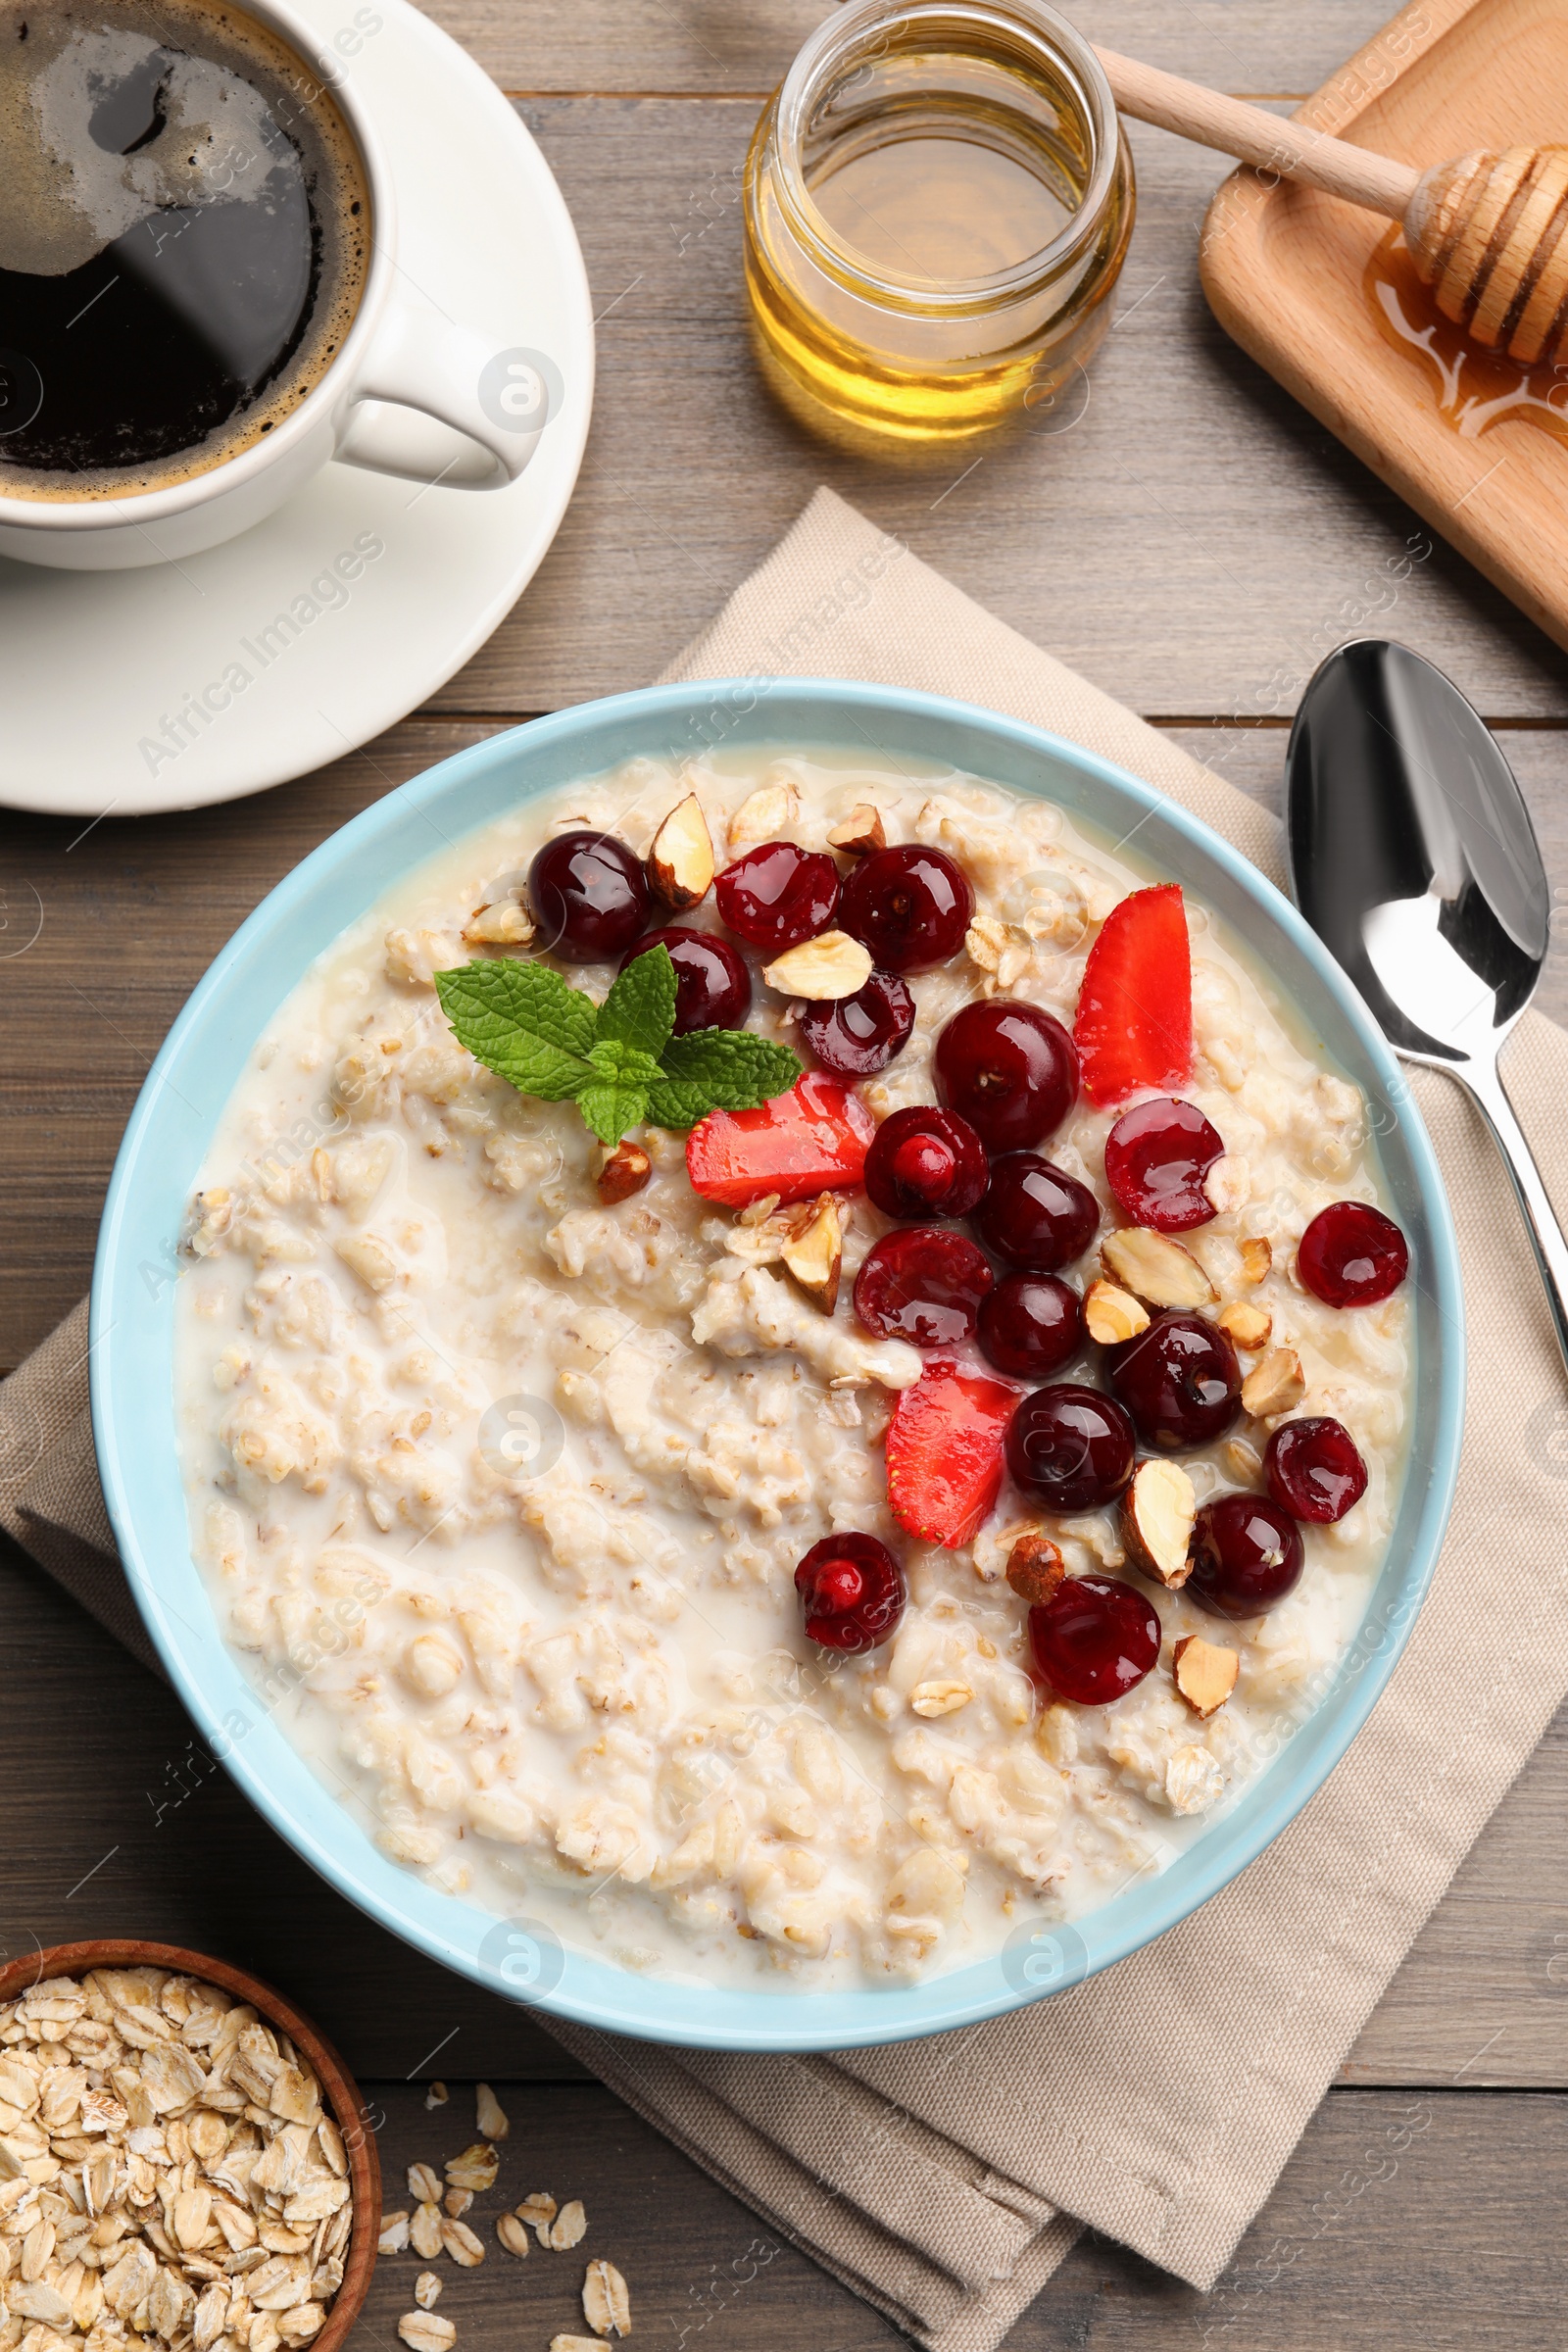 Photo of Bowl of oatmeal porridge served with berries on wooden table, flat lay